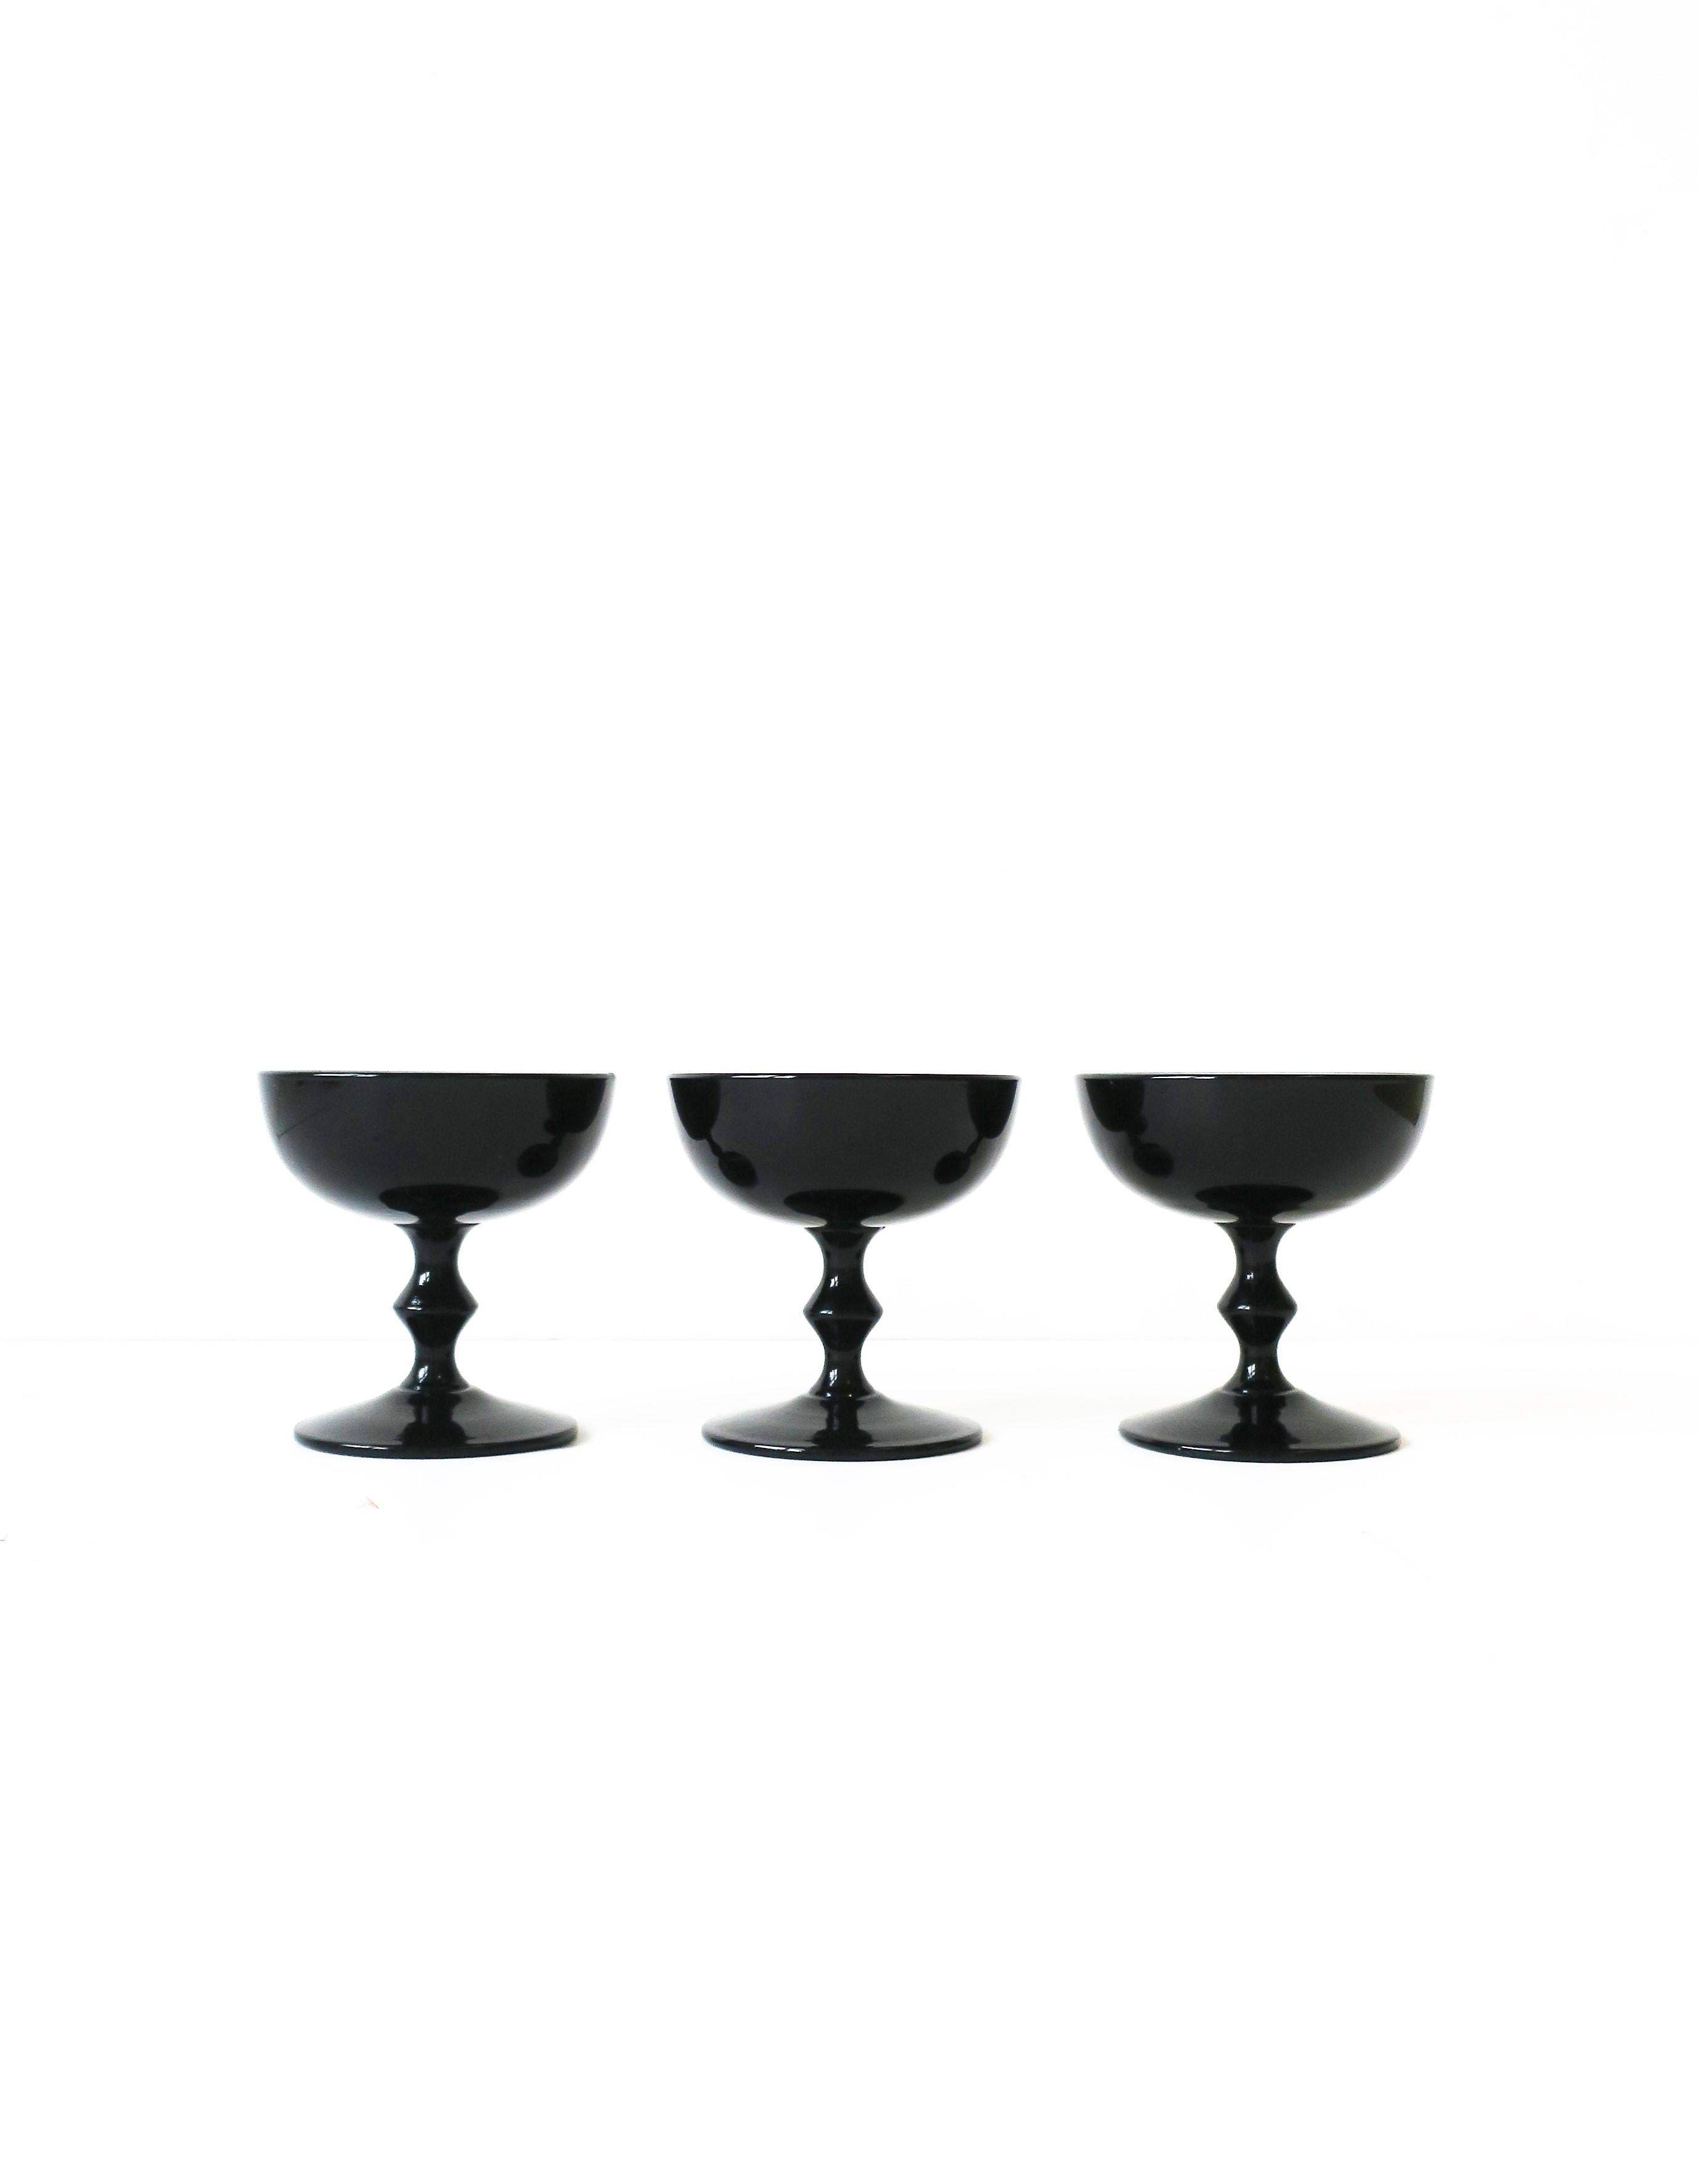 A chic set of three (3) vintage authentic designer Carlo Moretti black and white Italian Murano Champagne coupe or cocktail glasses, circa mid-20th century, Italy. A rare set retaining original label on bottom as show in images #15 and 16. Set